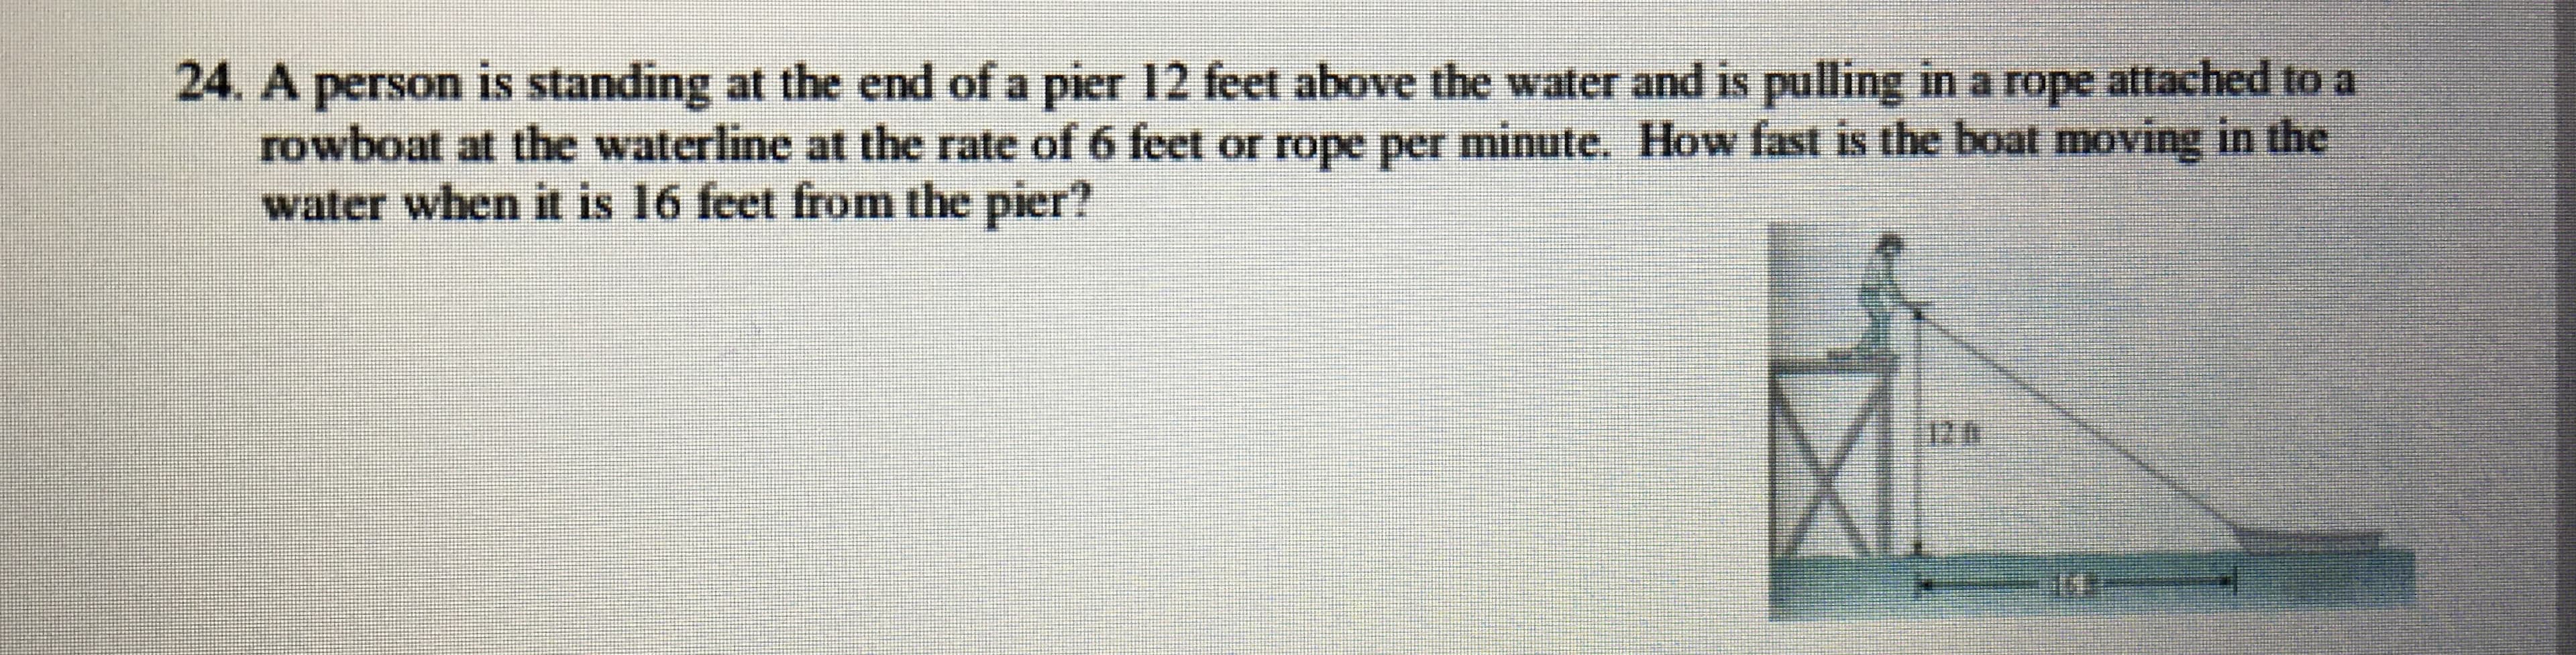 24. A person is standing at the end of a pier 12 feet above the water and is pulling in a rope attached to a
rowboat at the waterline at the rate of 6 feet or rope per minute. How fast is the boat moving in the
water when it is 16 feet from the pier?
12.6
